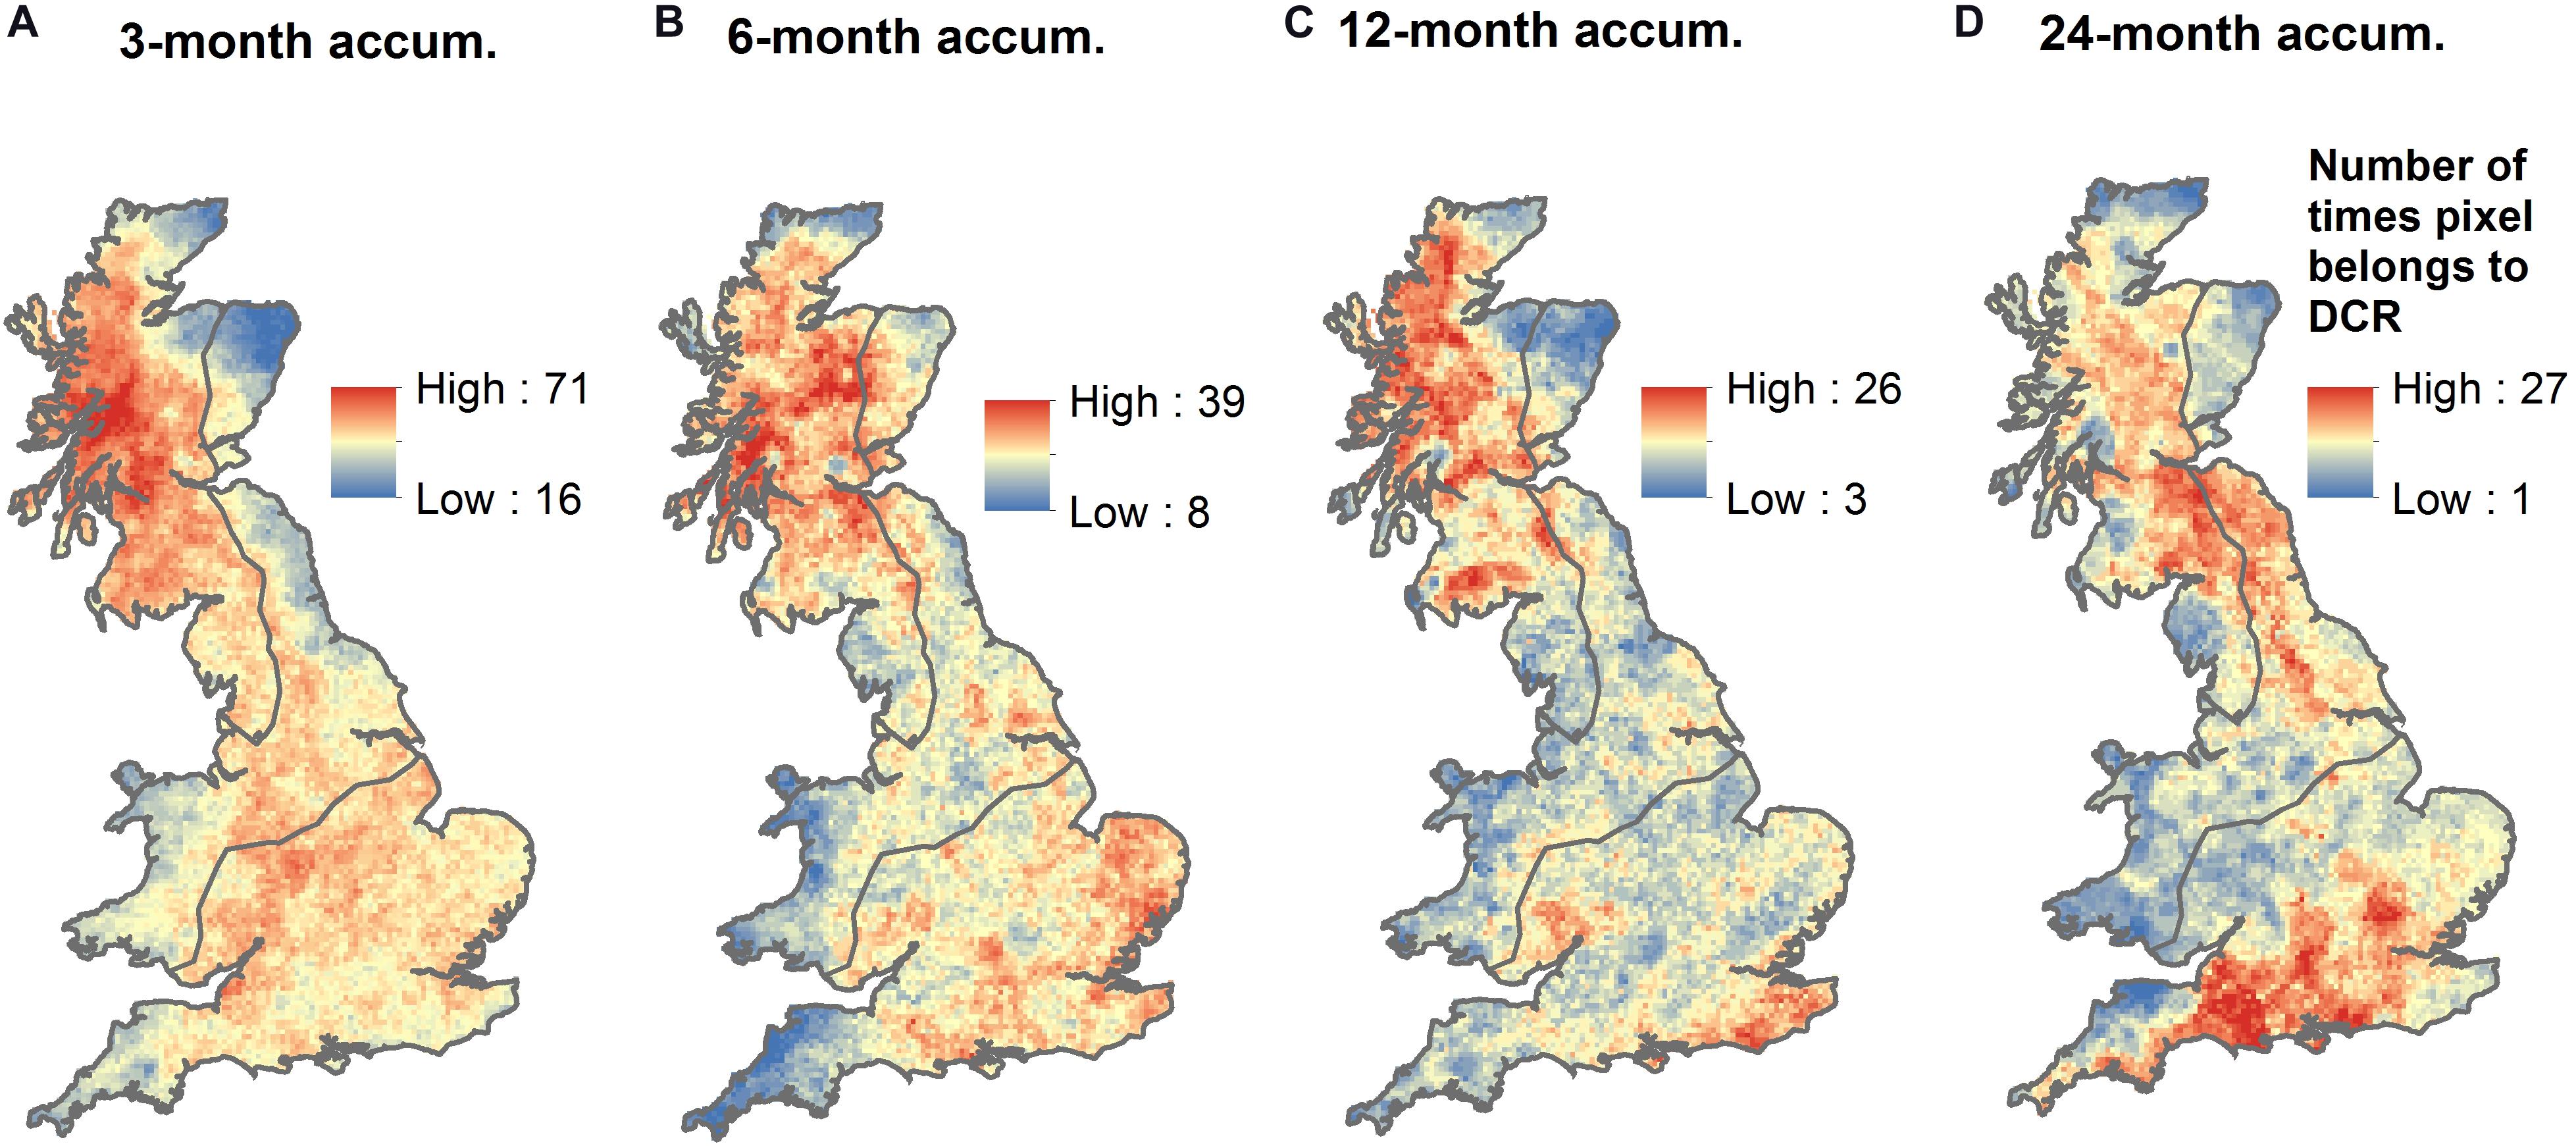 drought in the uk case study